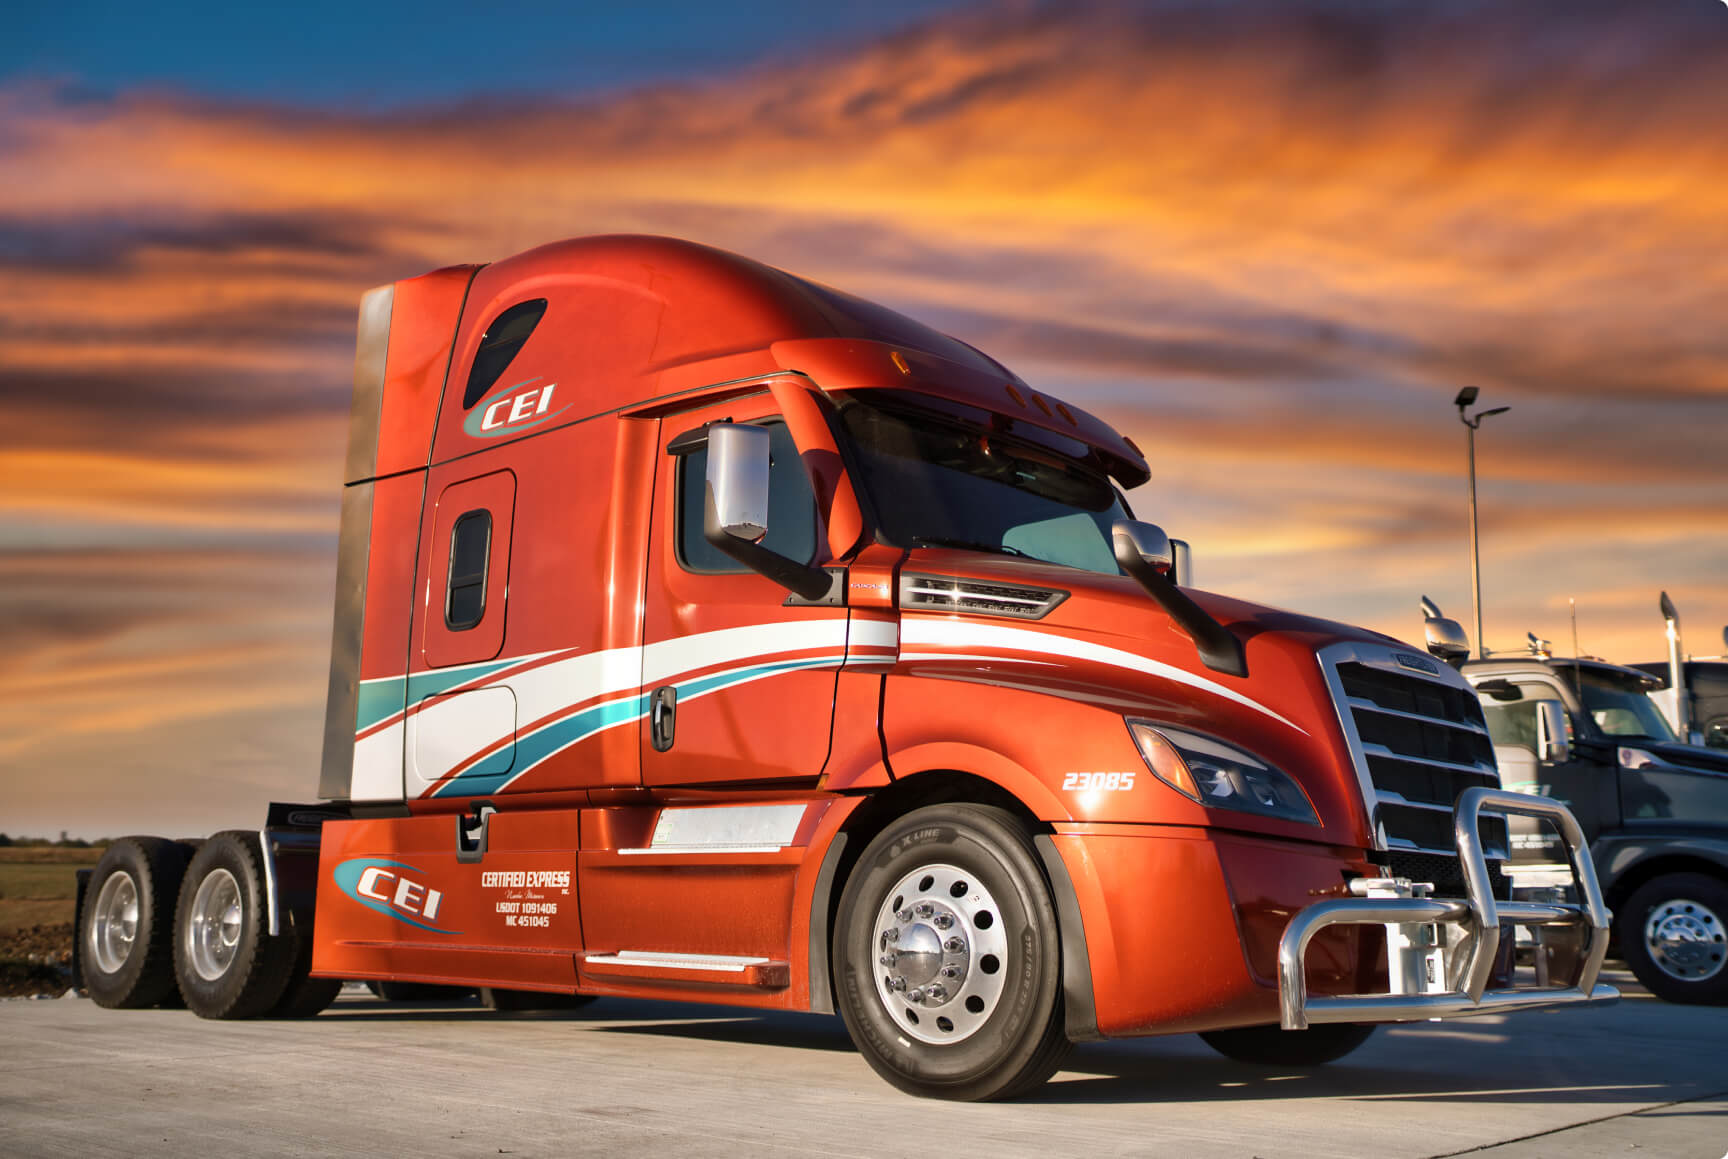 A red-orange semi truck is parked beside another truck with a cloudy sunset in the background.